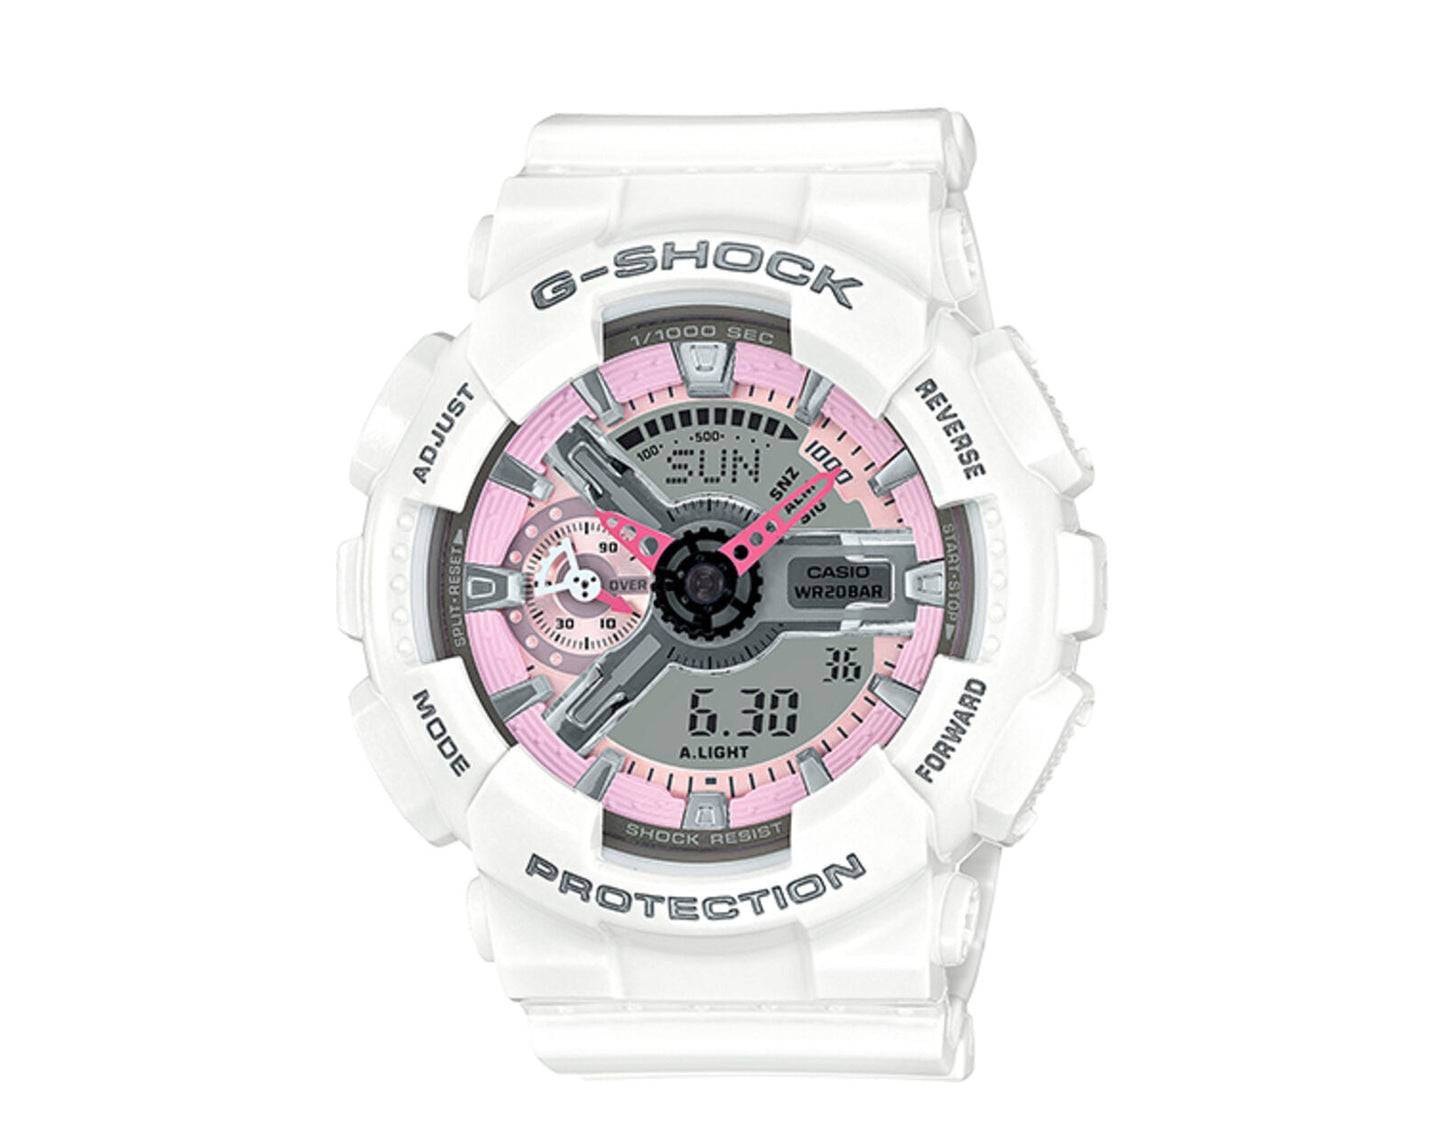 Casio G-Shock Analog-Digital Watch Latest Model With Amazing Features Full White Digital Dial G708